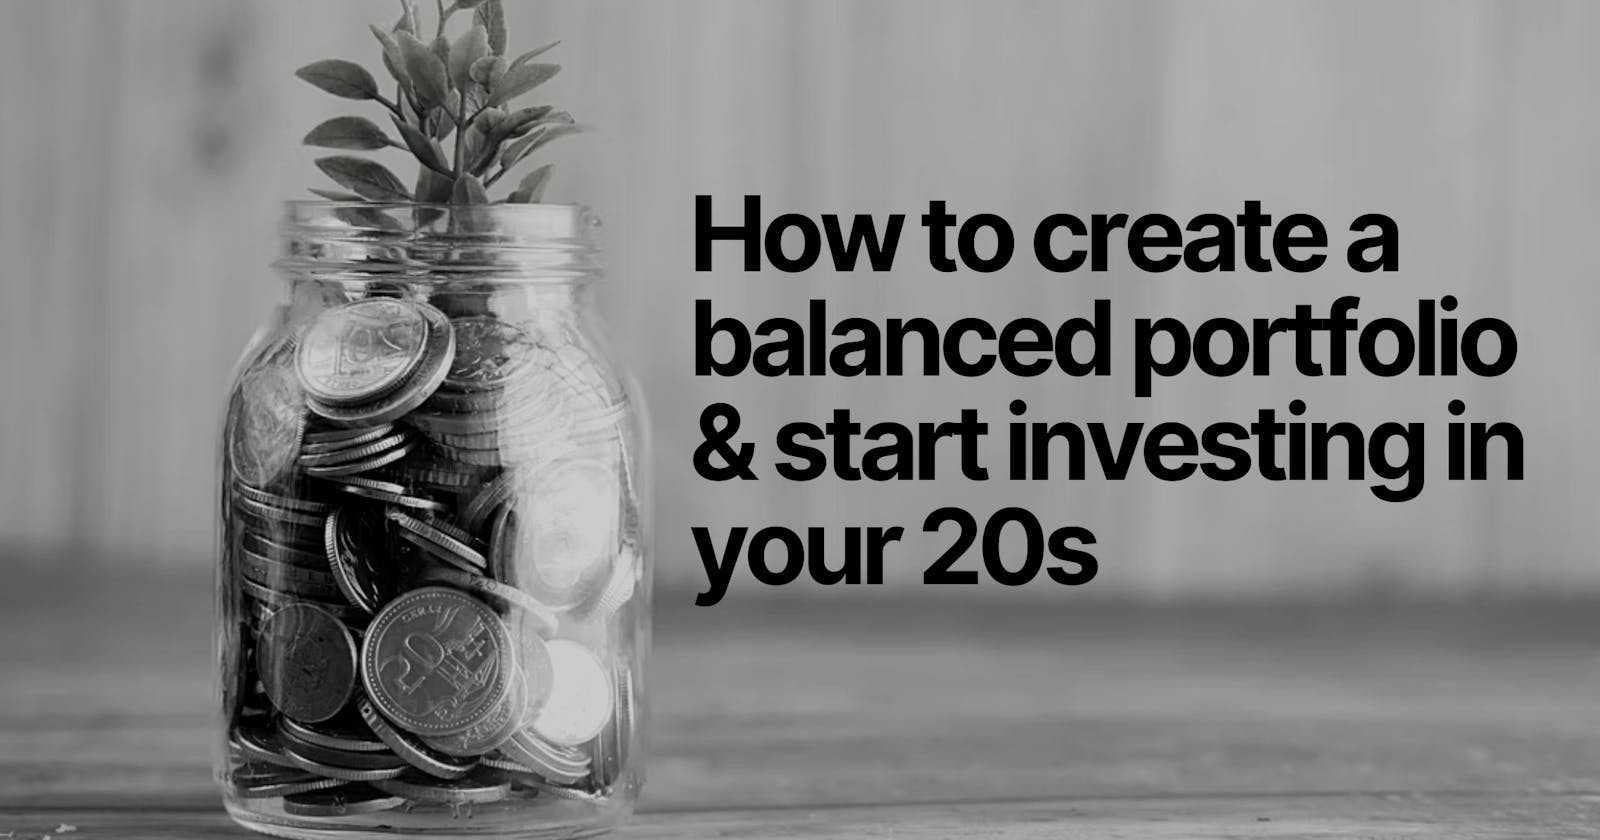 How to create a balanced portfolio & start investing in your 20s